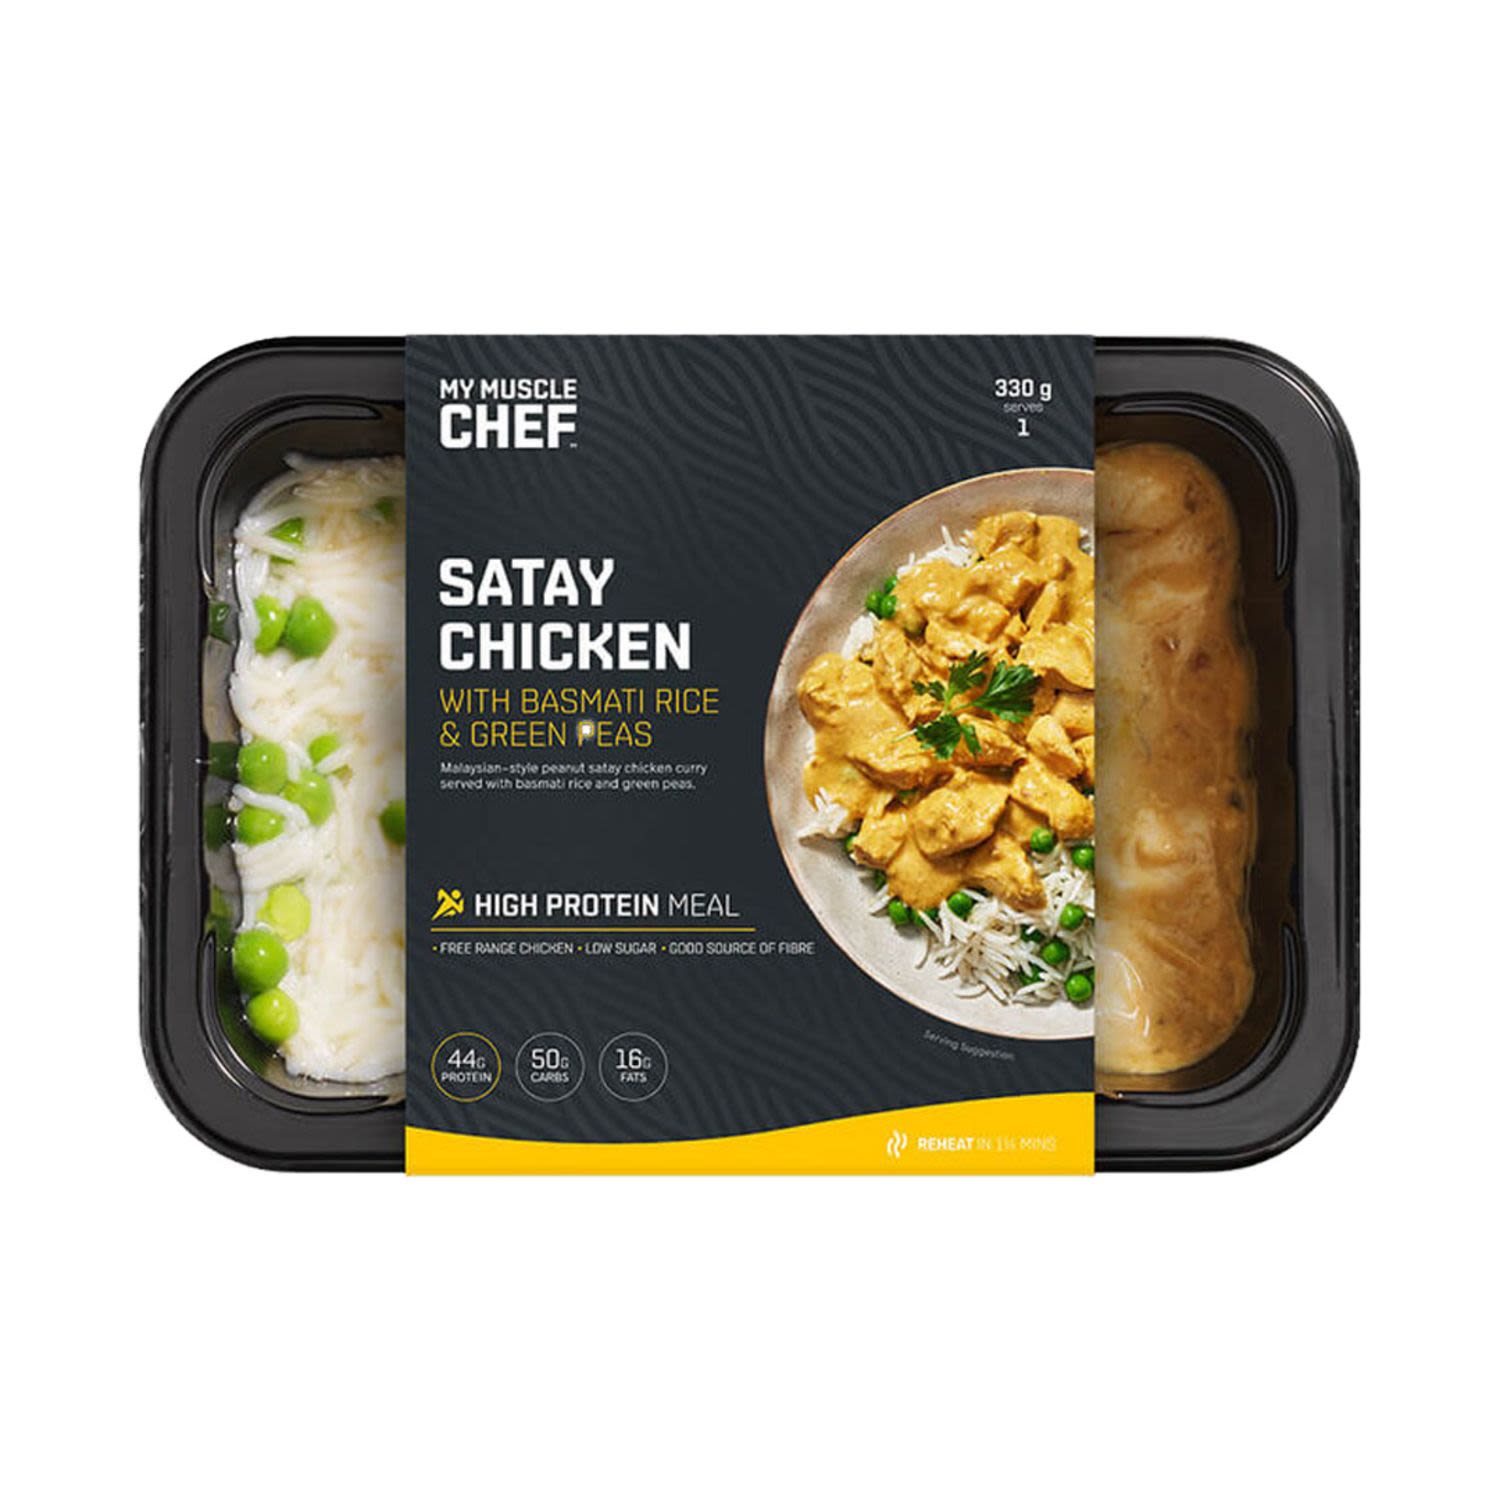 My Muscle Chef Satay Chicken with Basmati Rice and Green Peas, 330 Gram